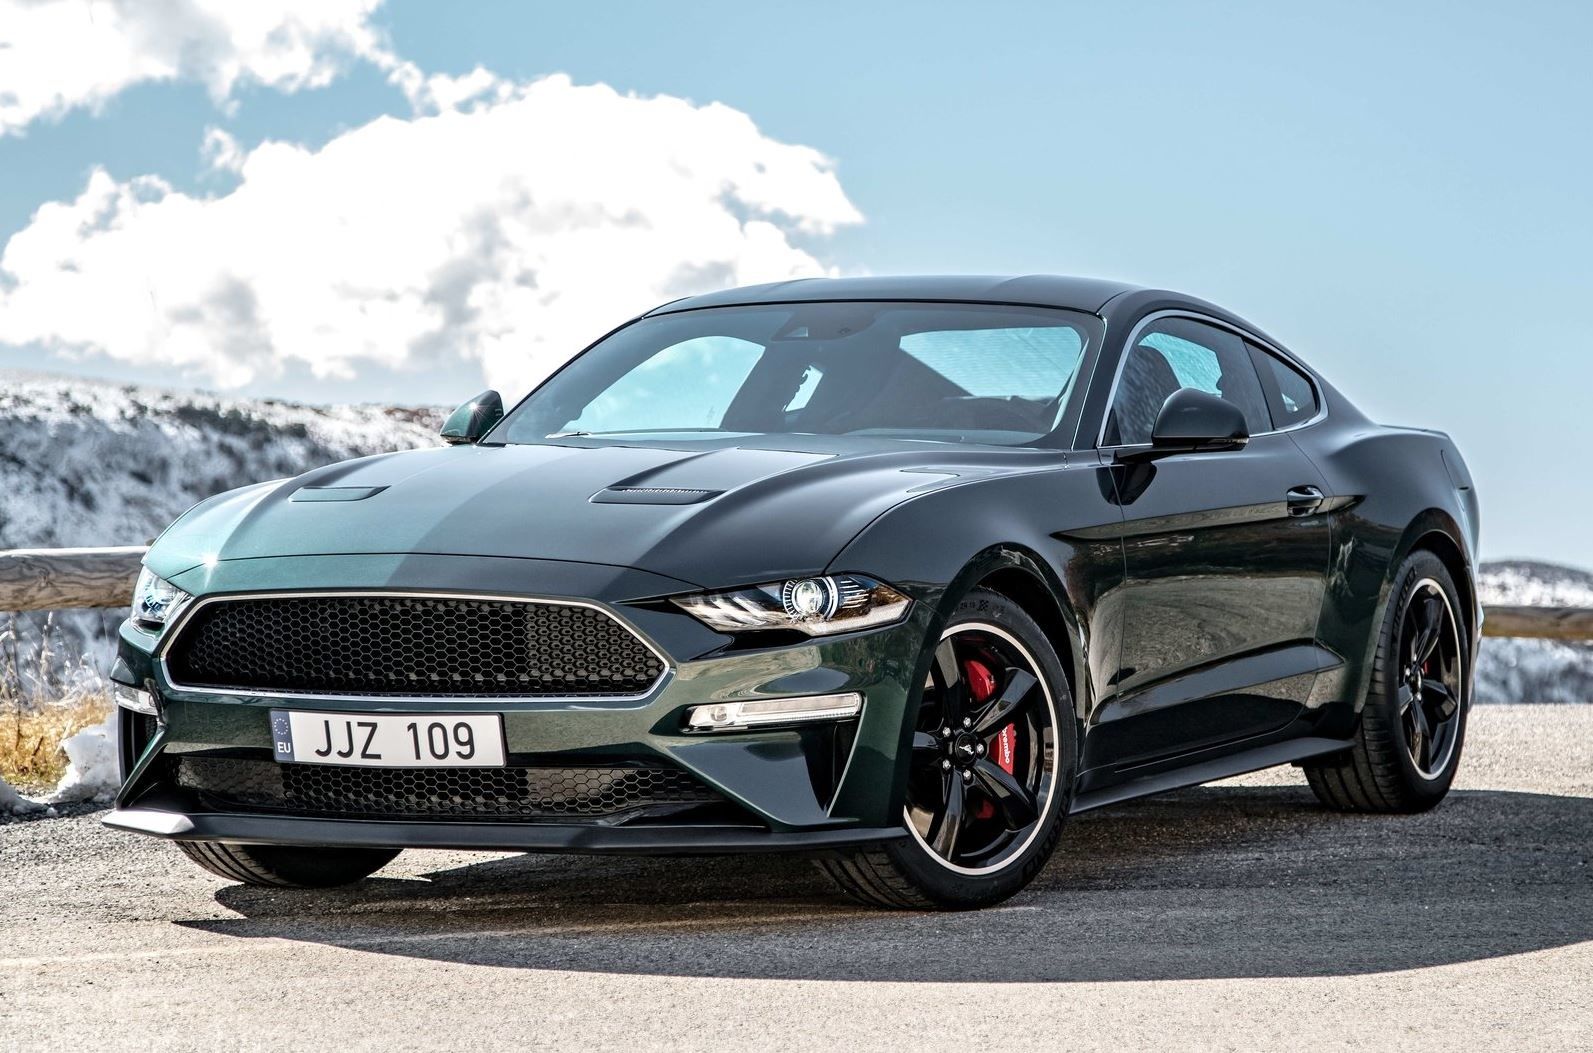 The 2019 Ford Mustang Demands Attention and Gets It